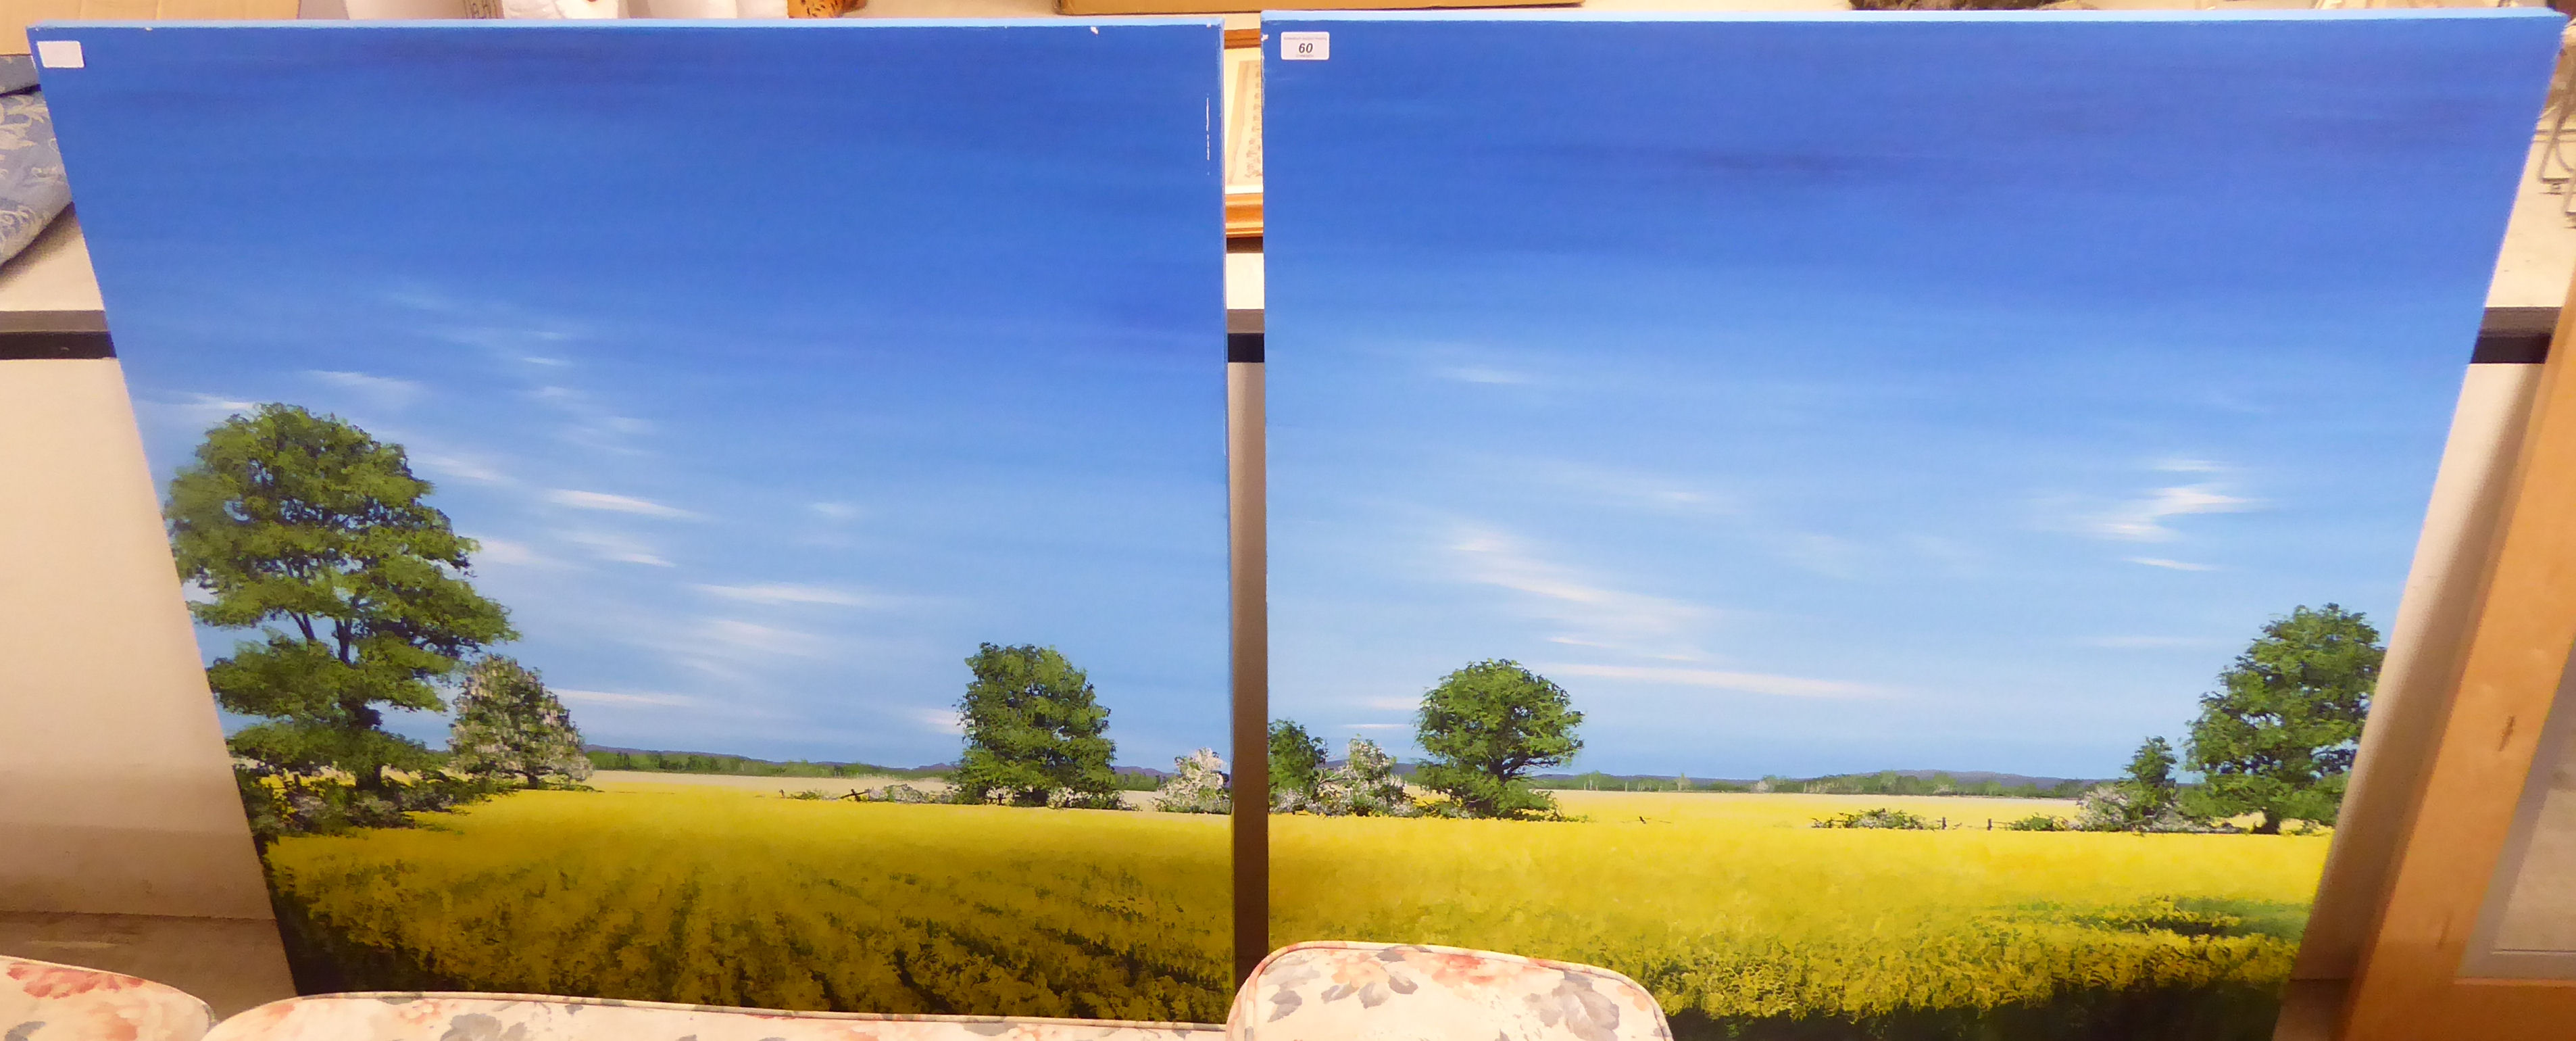 Simon Savage - a pair of landscapes with flowering rapeseed and trees oil on canvas one bears a